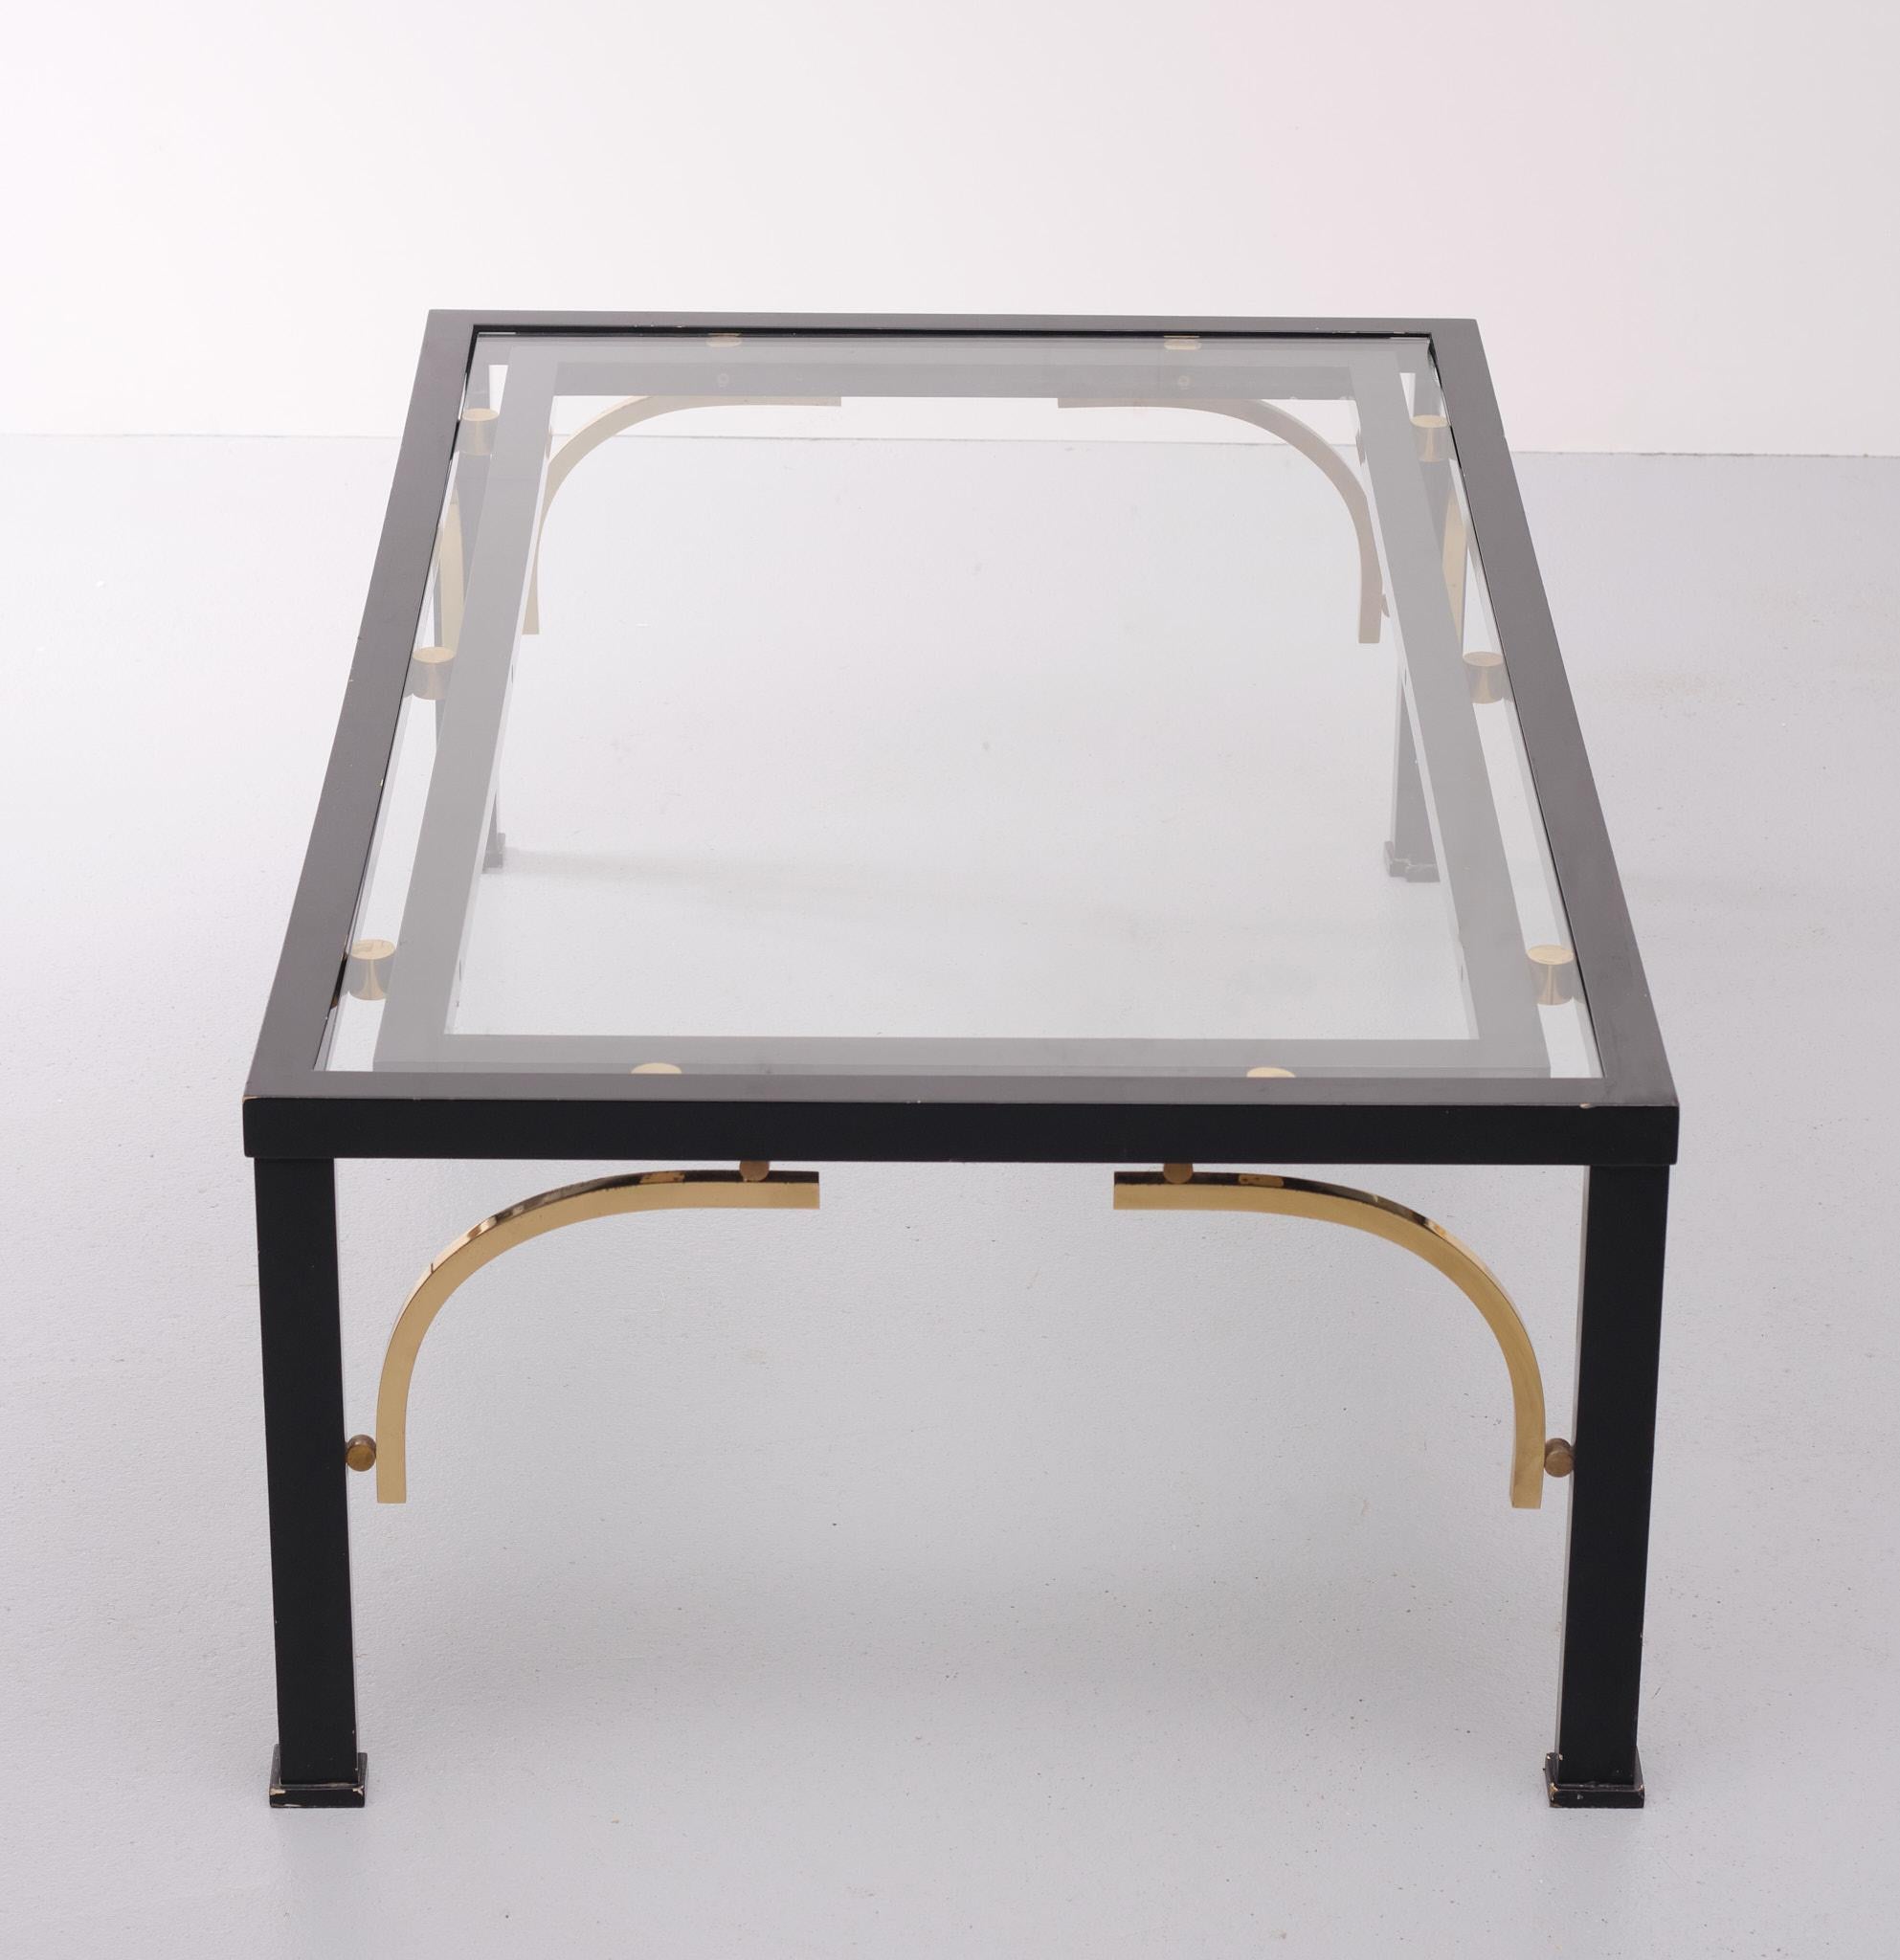 Unique coffee table. Made with wooden feet black metal base and brass 
details. New glass top. Attributed to Maison Jansen 1970s Very stylish table.